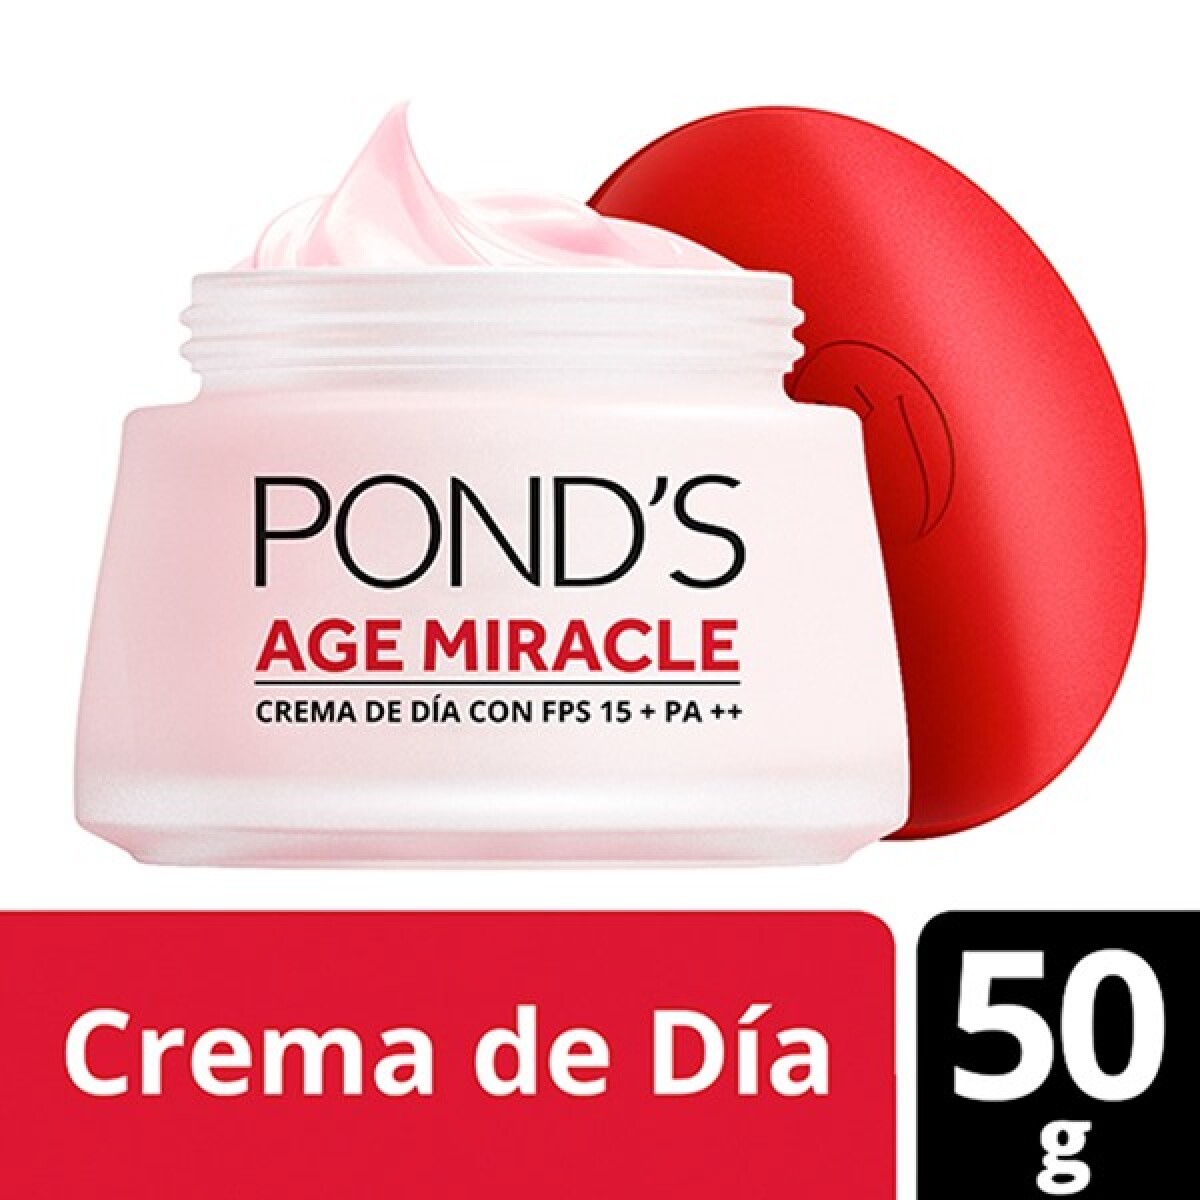 CREMA PONDS AGE MIRACLE FIRM LIFT DIA 50 GR 